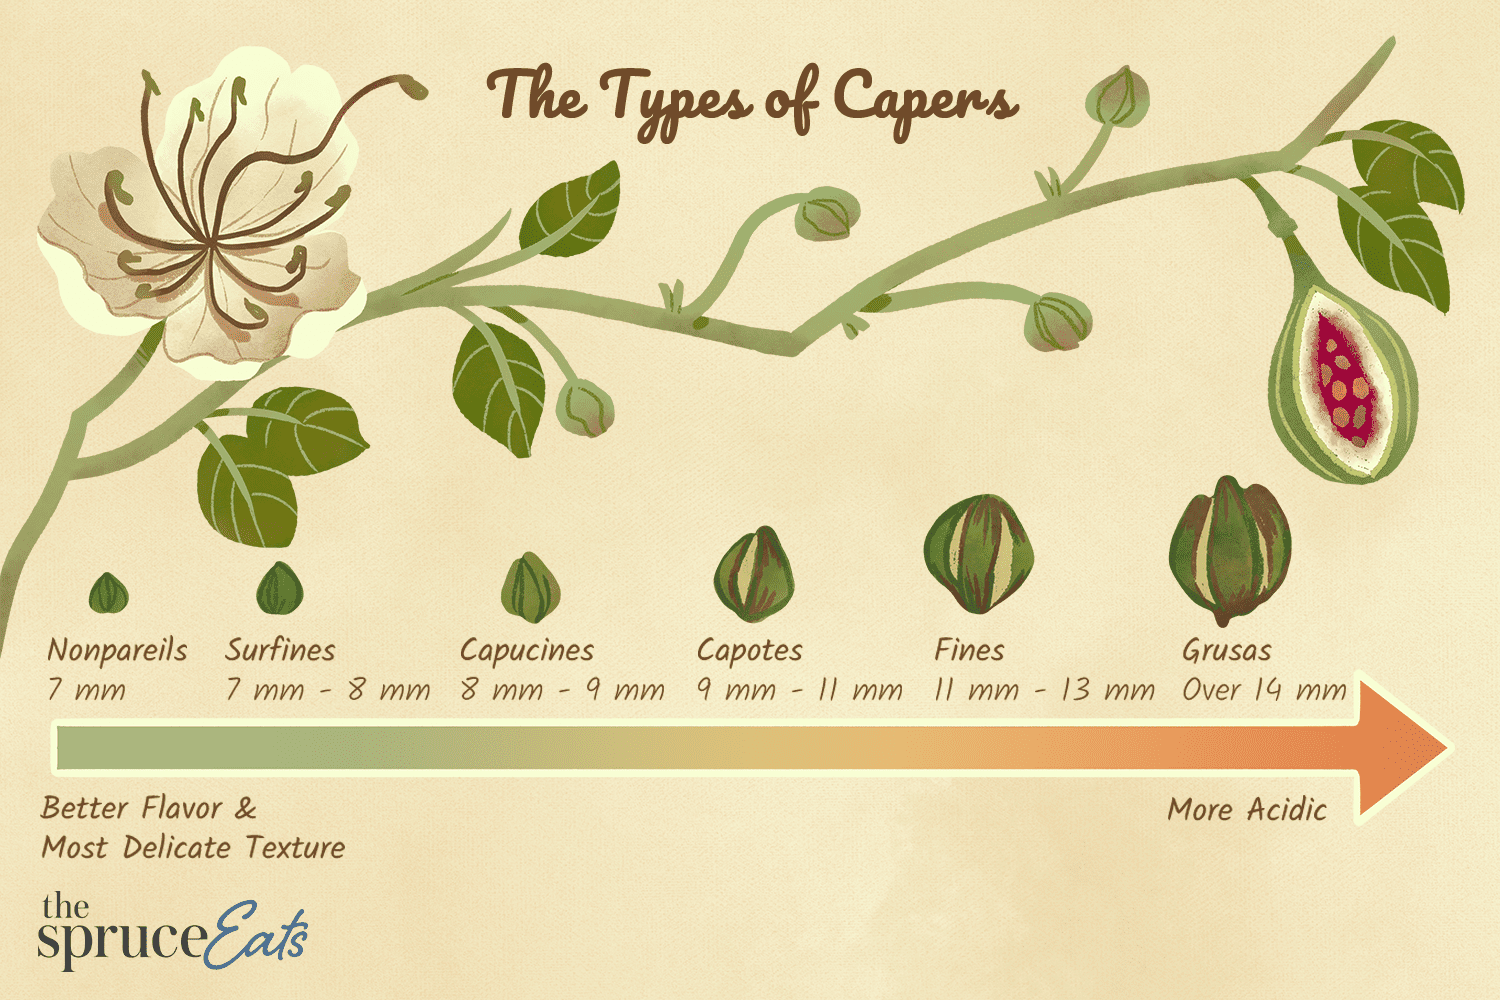 What Are Capers?